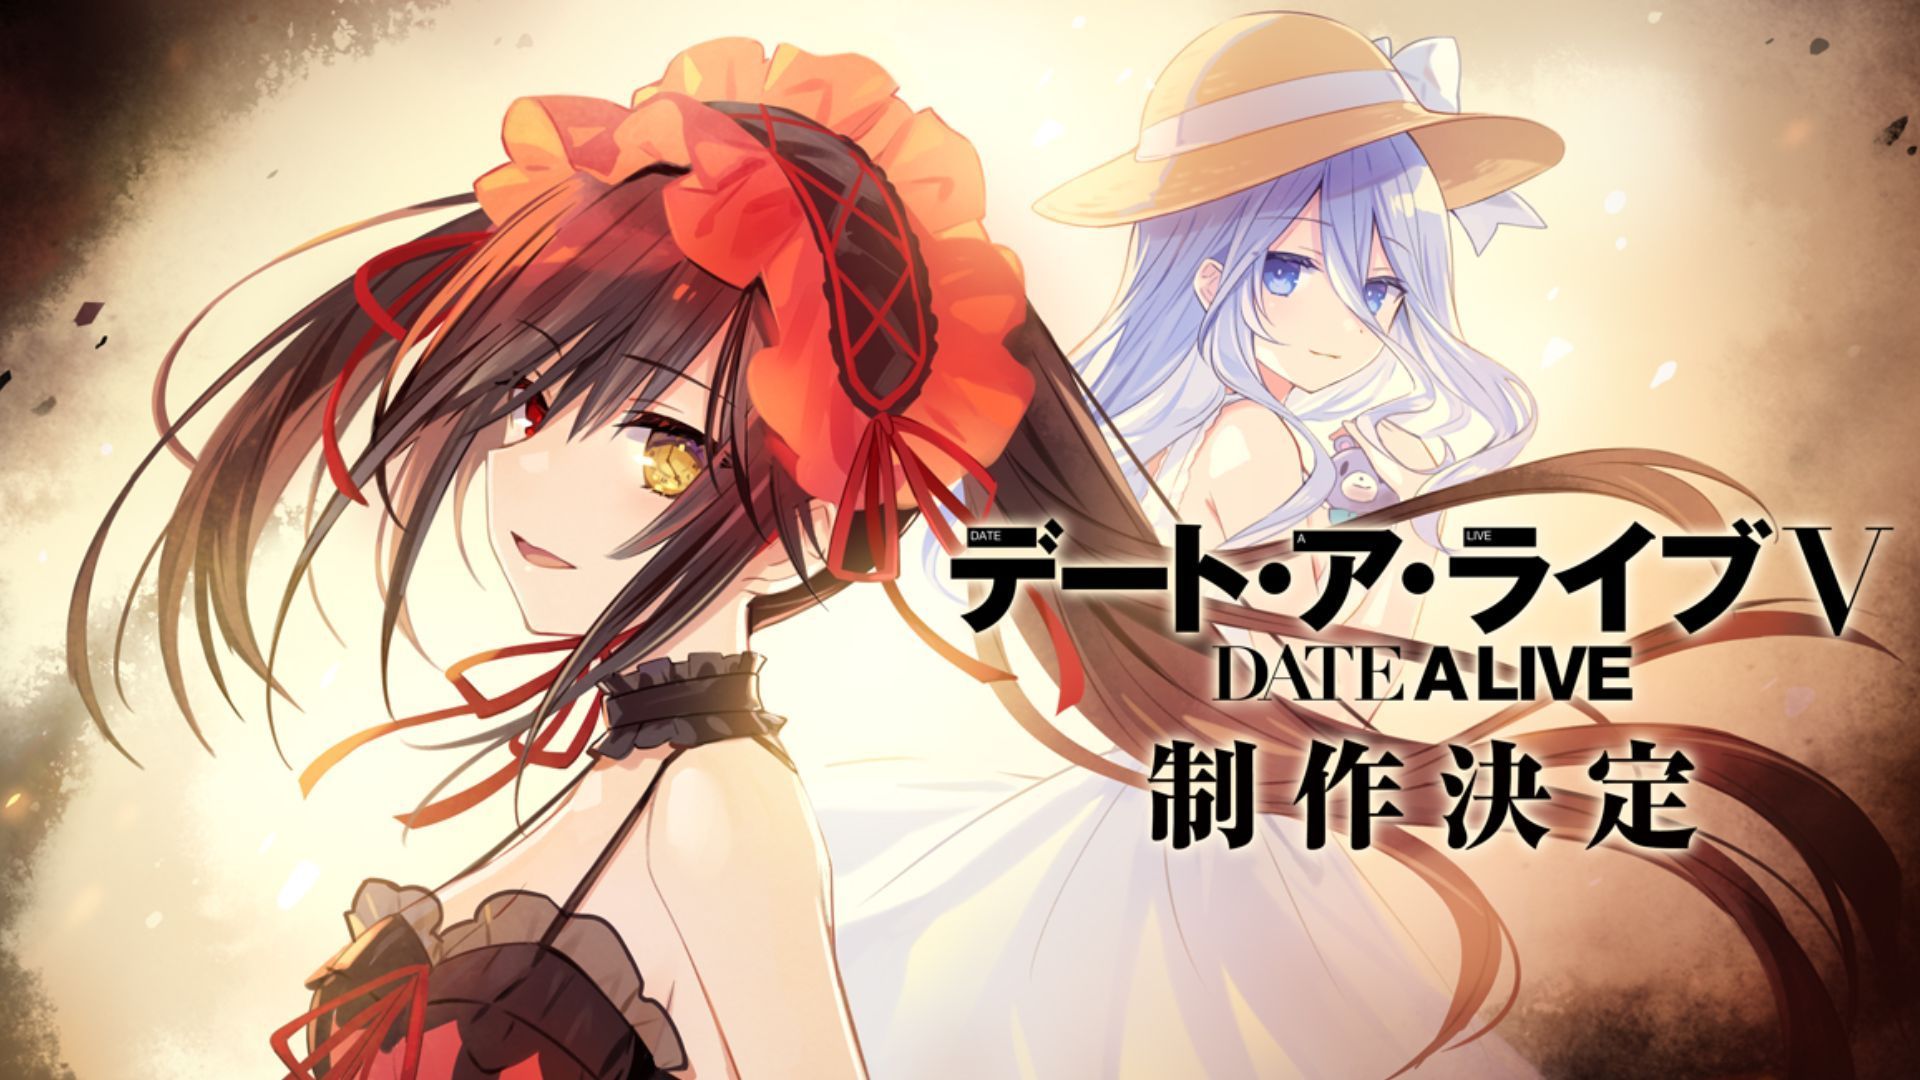 Date A Live anime live-action adaptation announced, released date revealed (Image via Geek Toys/Tsunako)